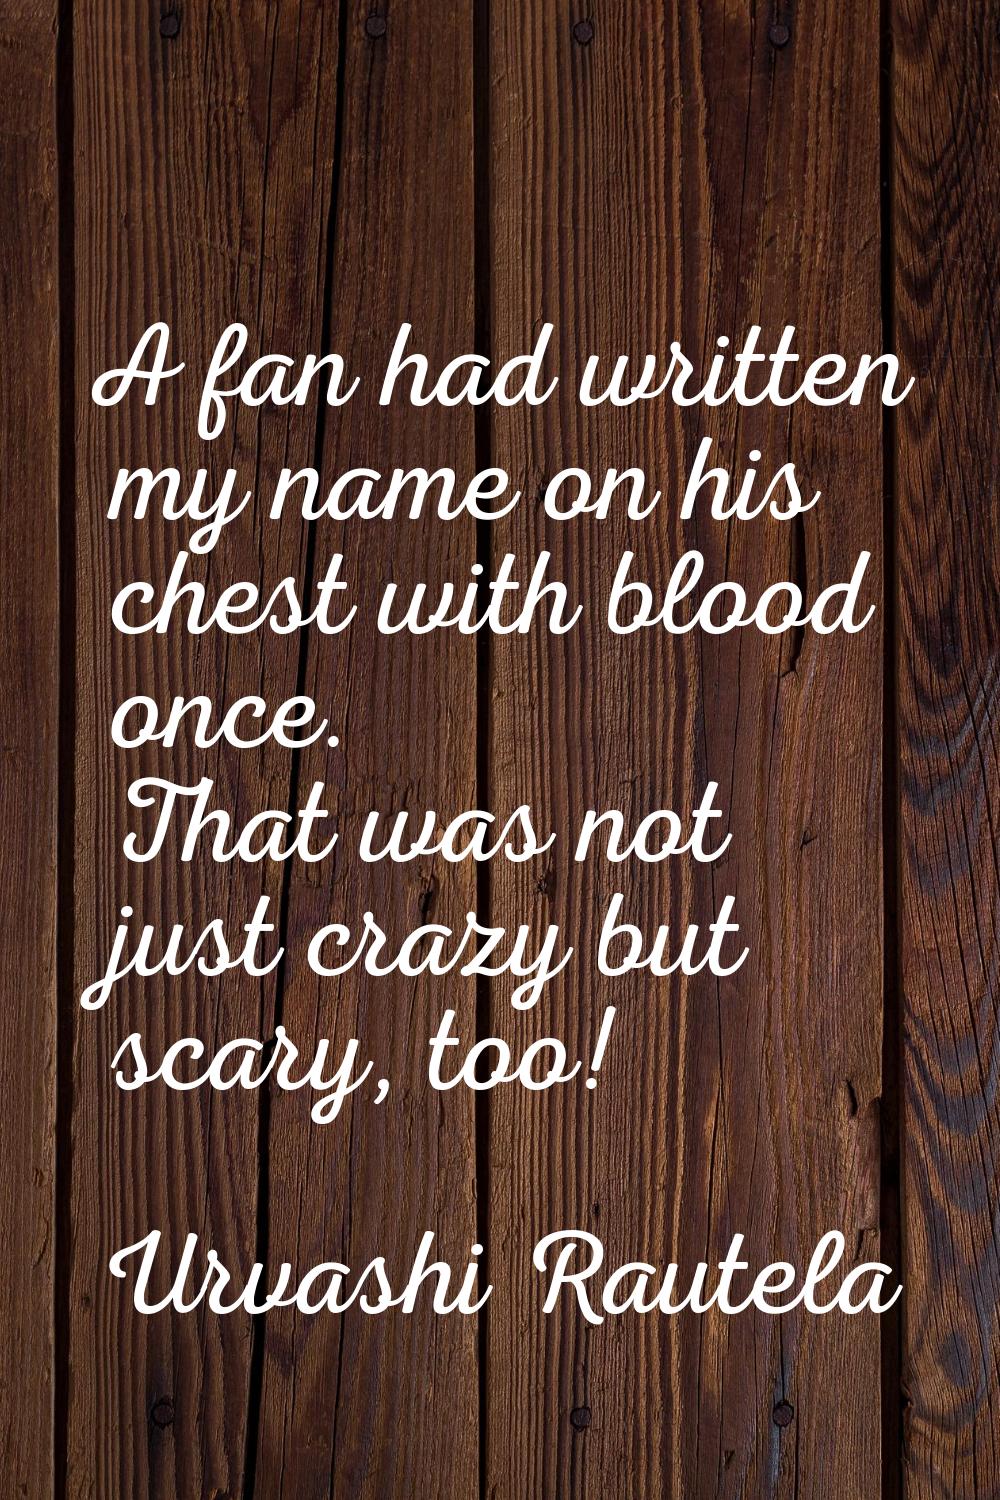 A fan had written my name on his chest with blood once. That was not just crazy but scary, too!